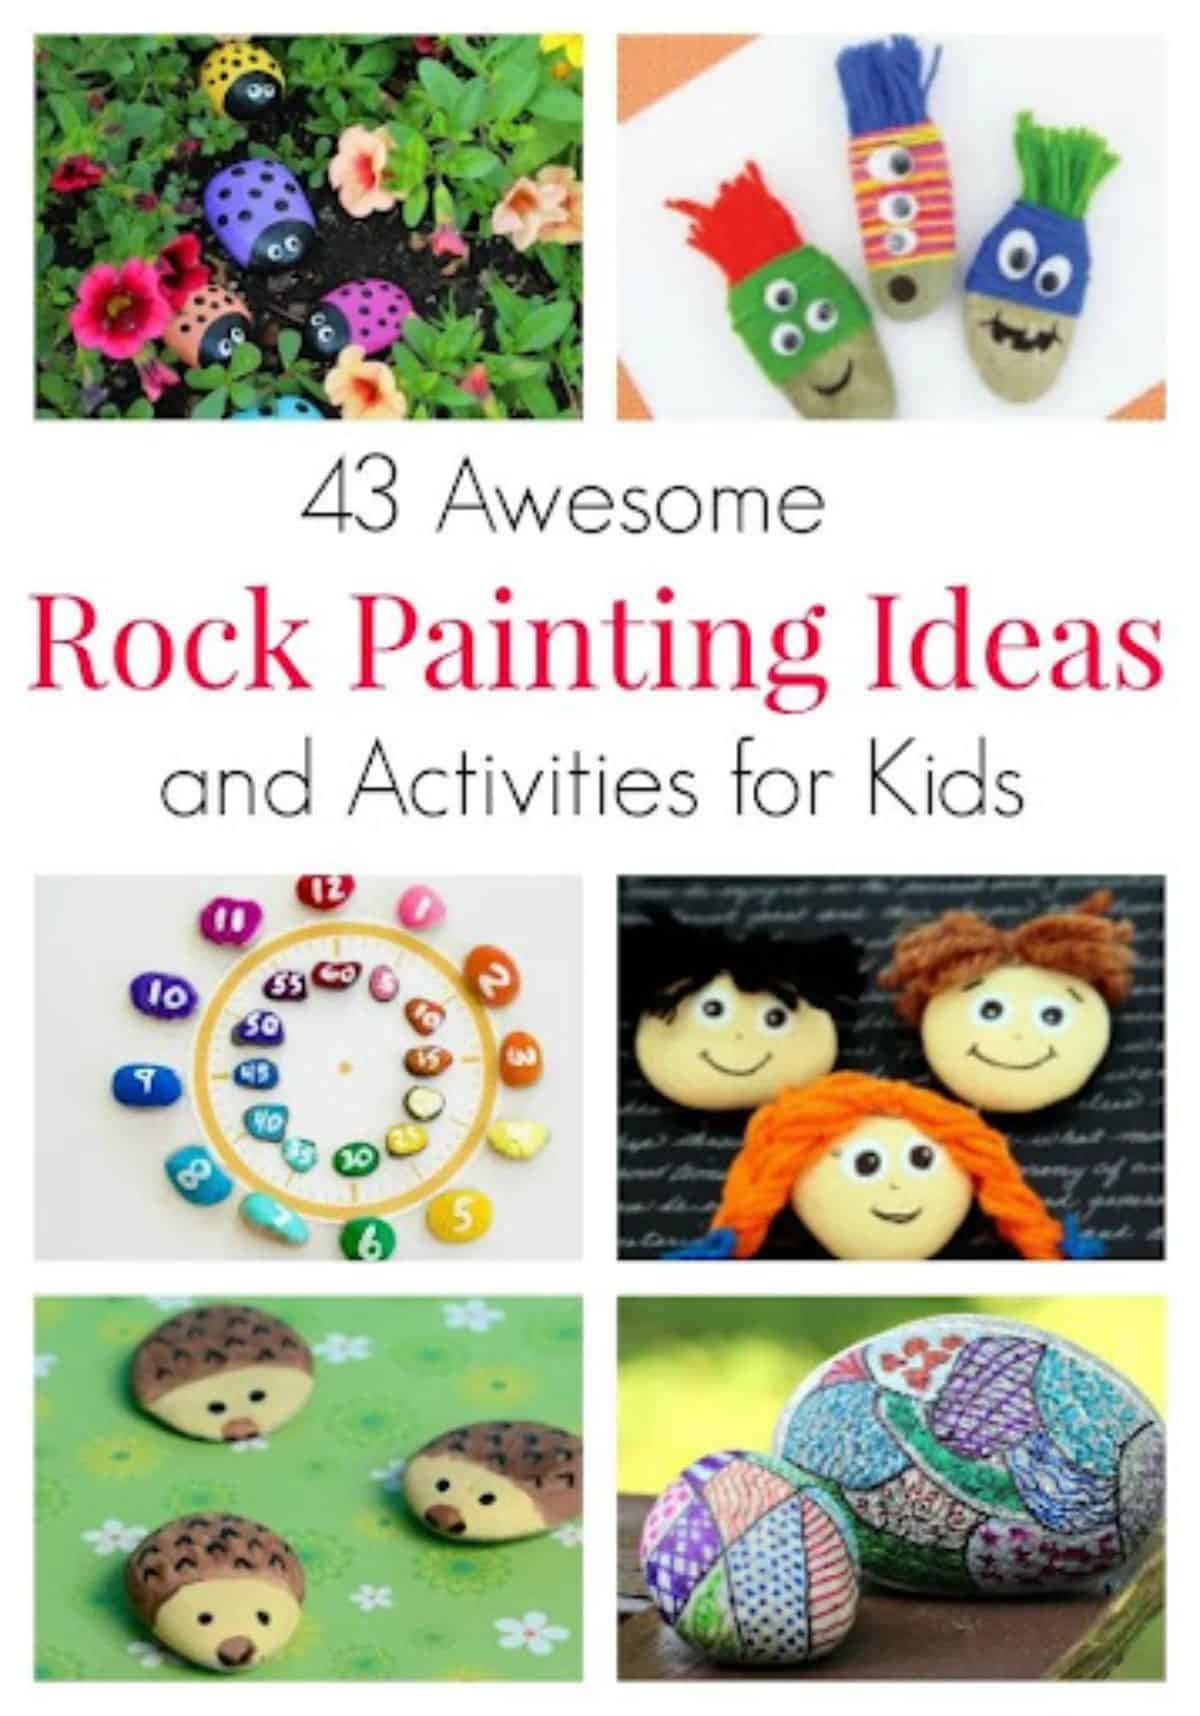 Rock Painting and Garden Decorations